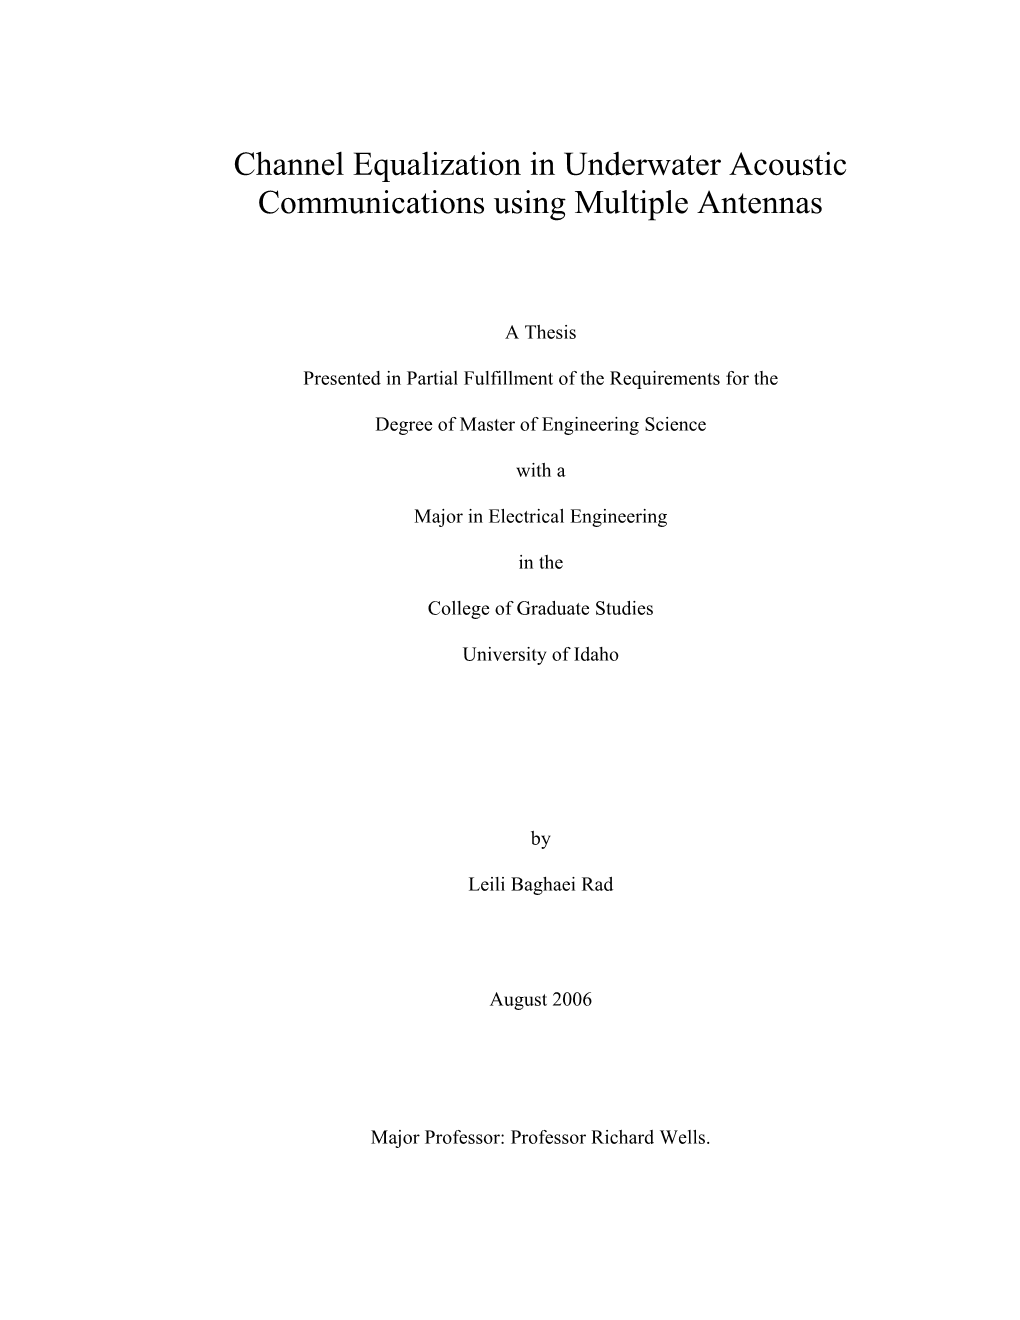 Channel Equalization in Underwater Acoustic Communications Using Multiple Antennas